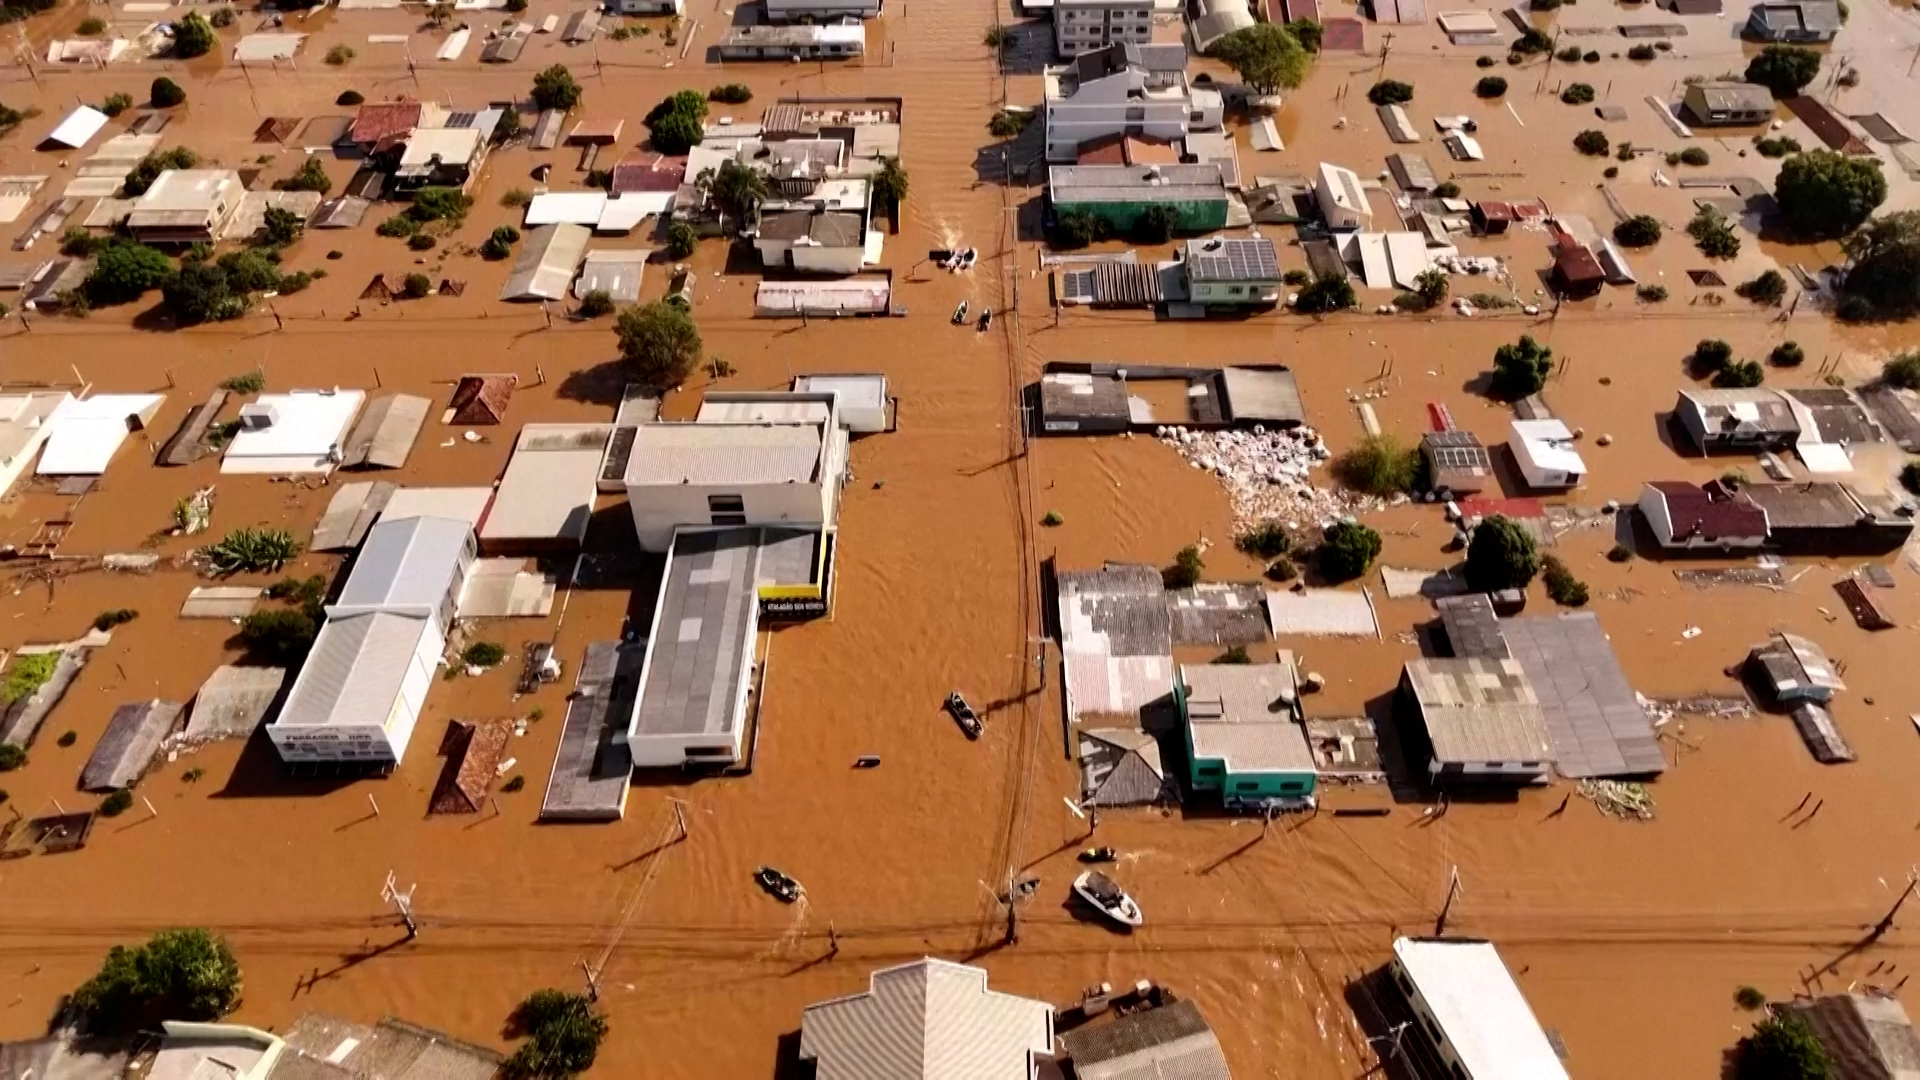 Severe floods inundate Brazil’s southernmost state, displacing thousands